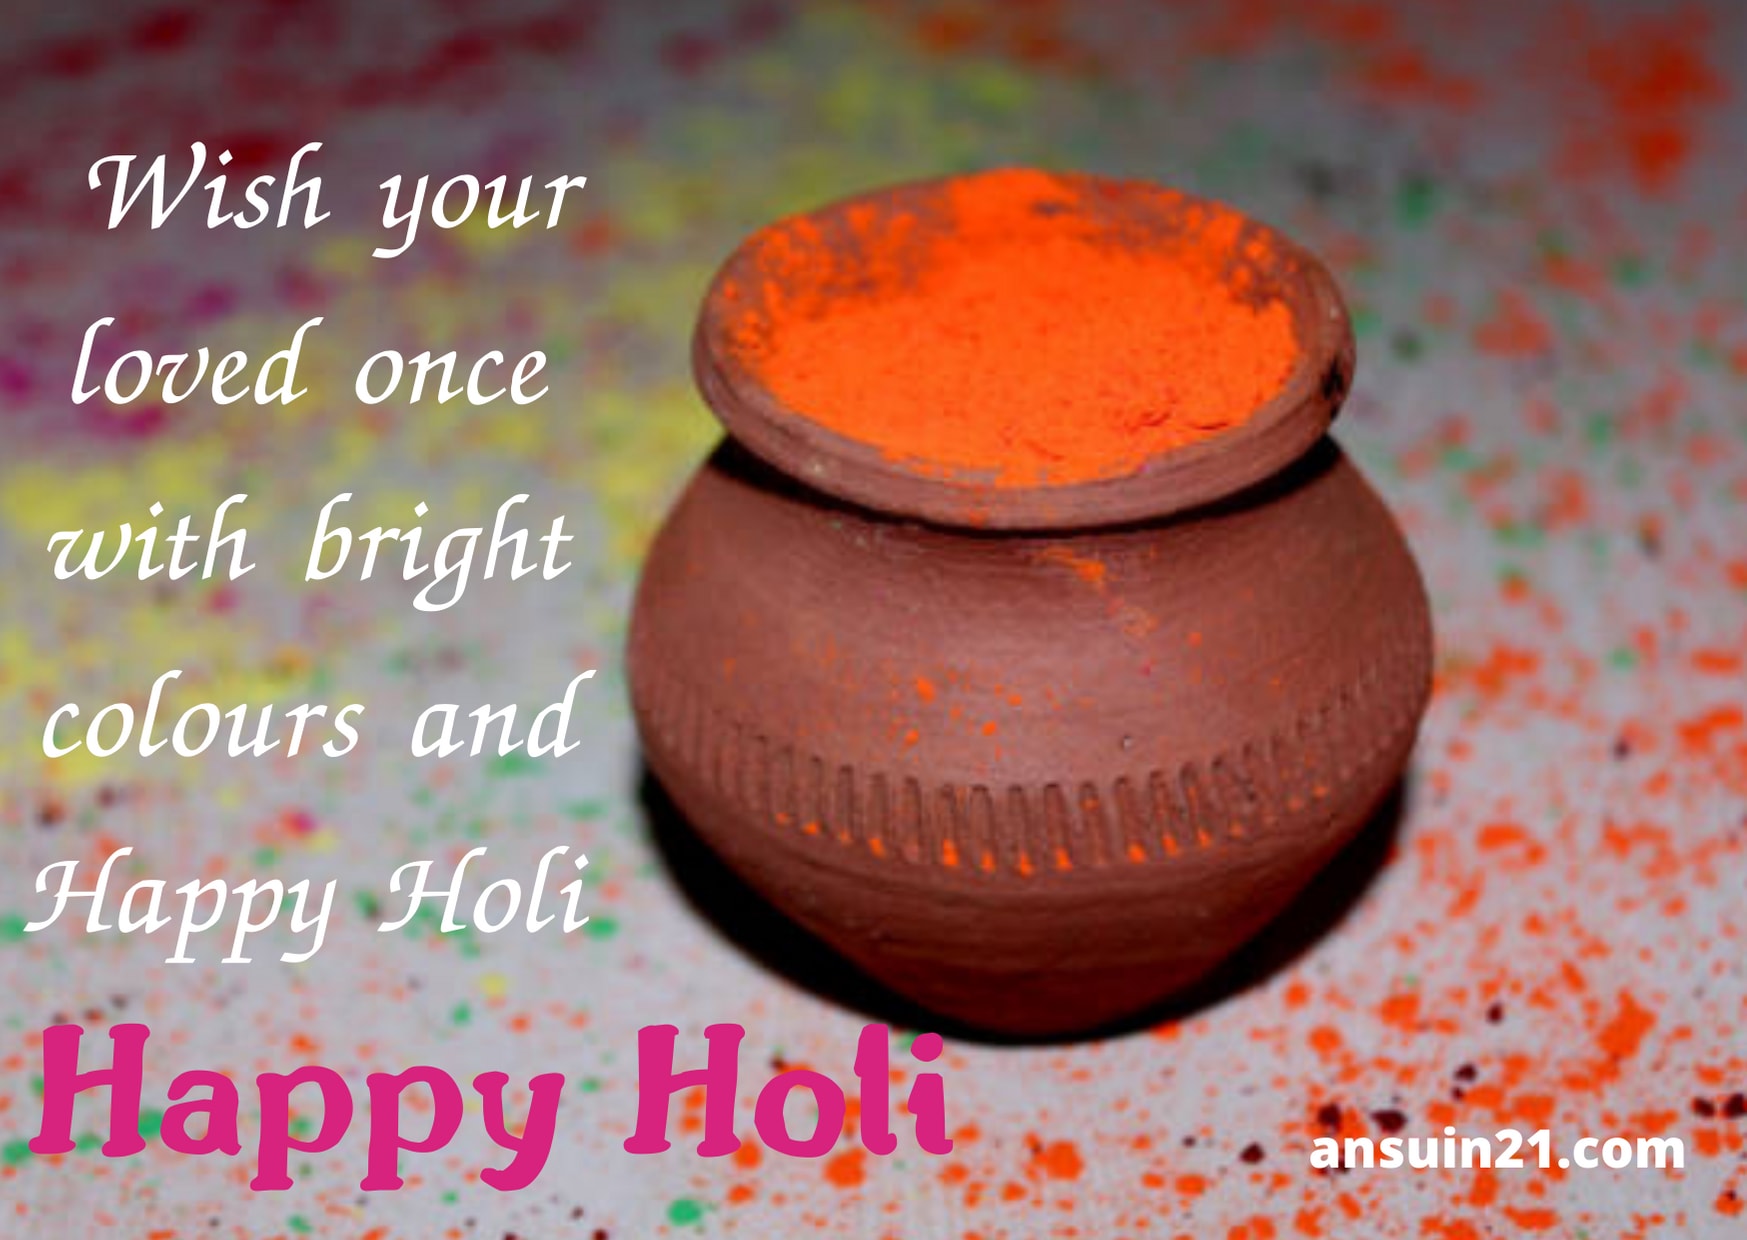 Happy Holi Wishes Images, Quotes SMS In Hindi and English,